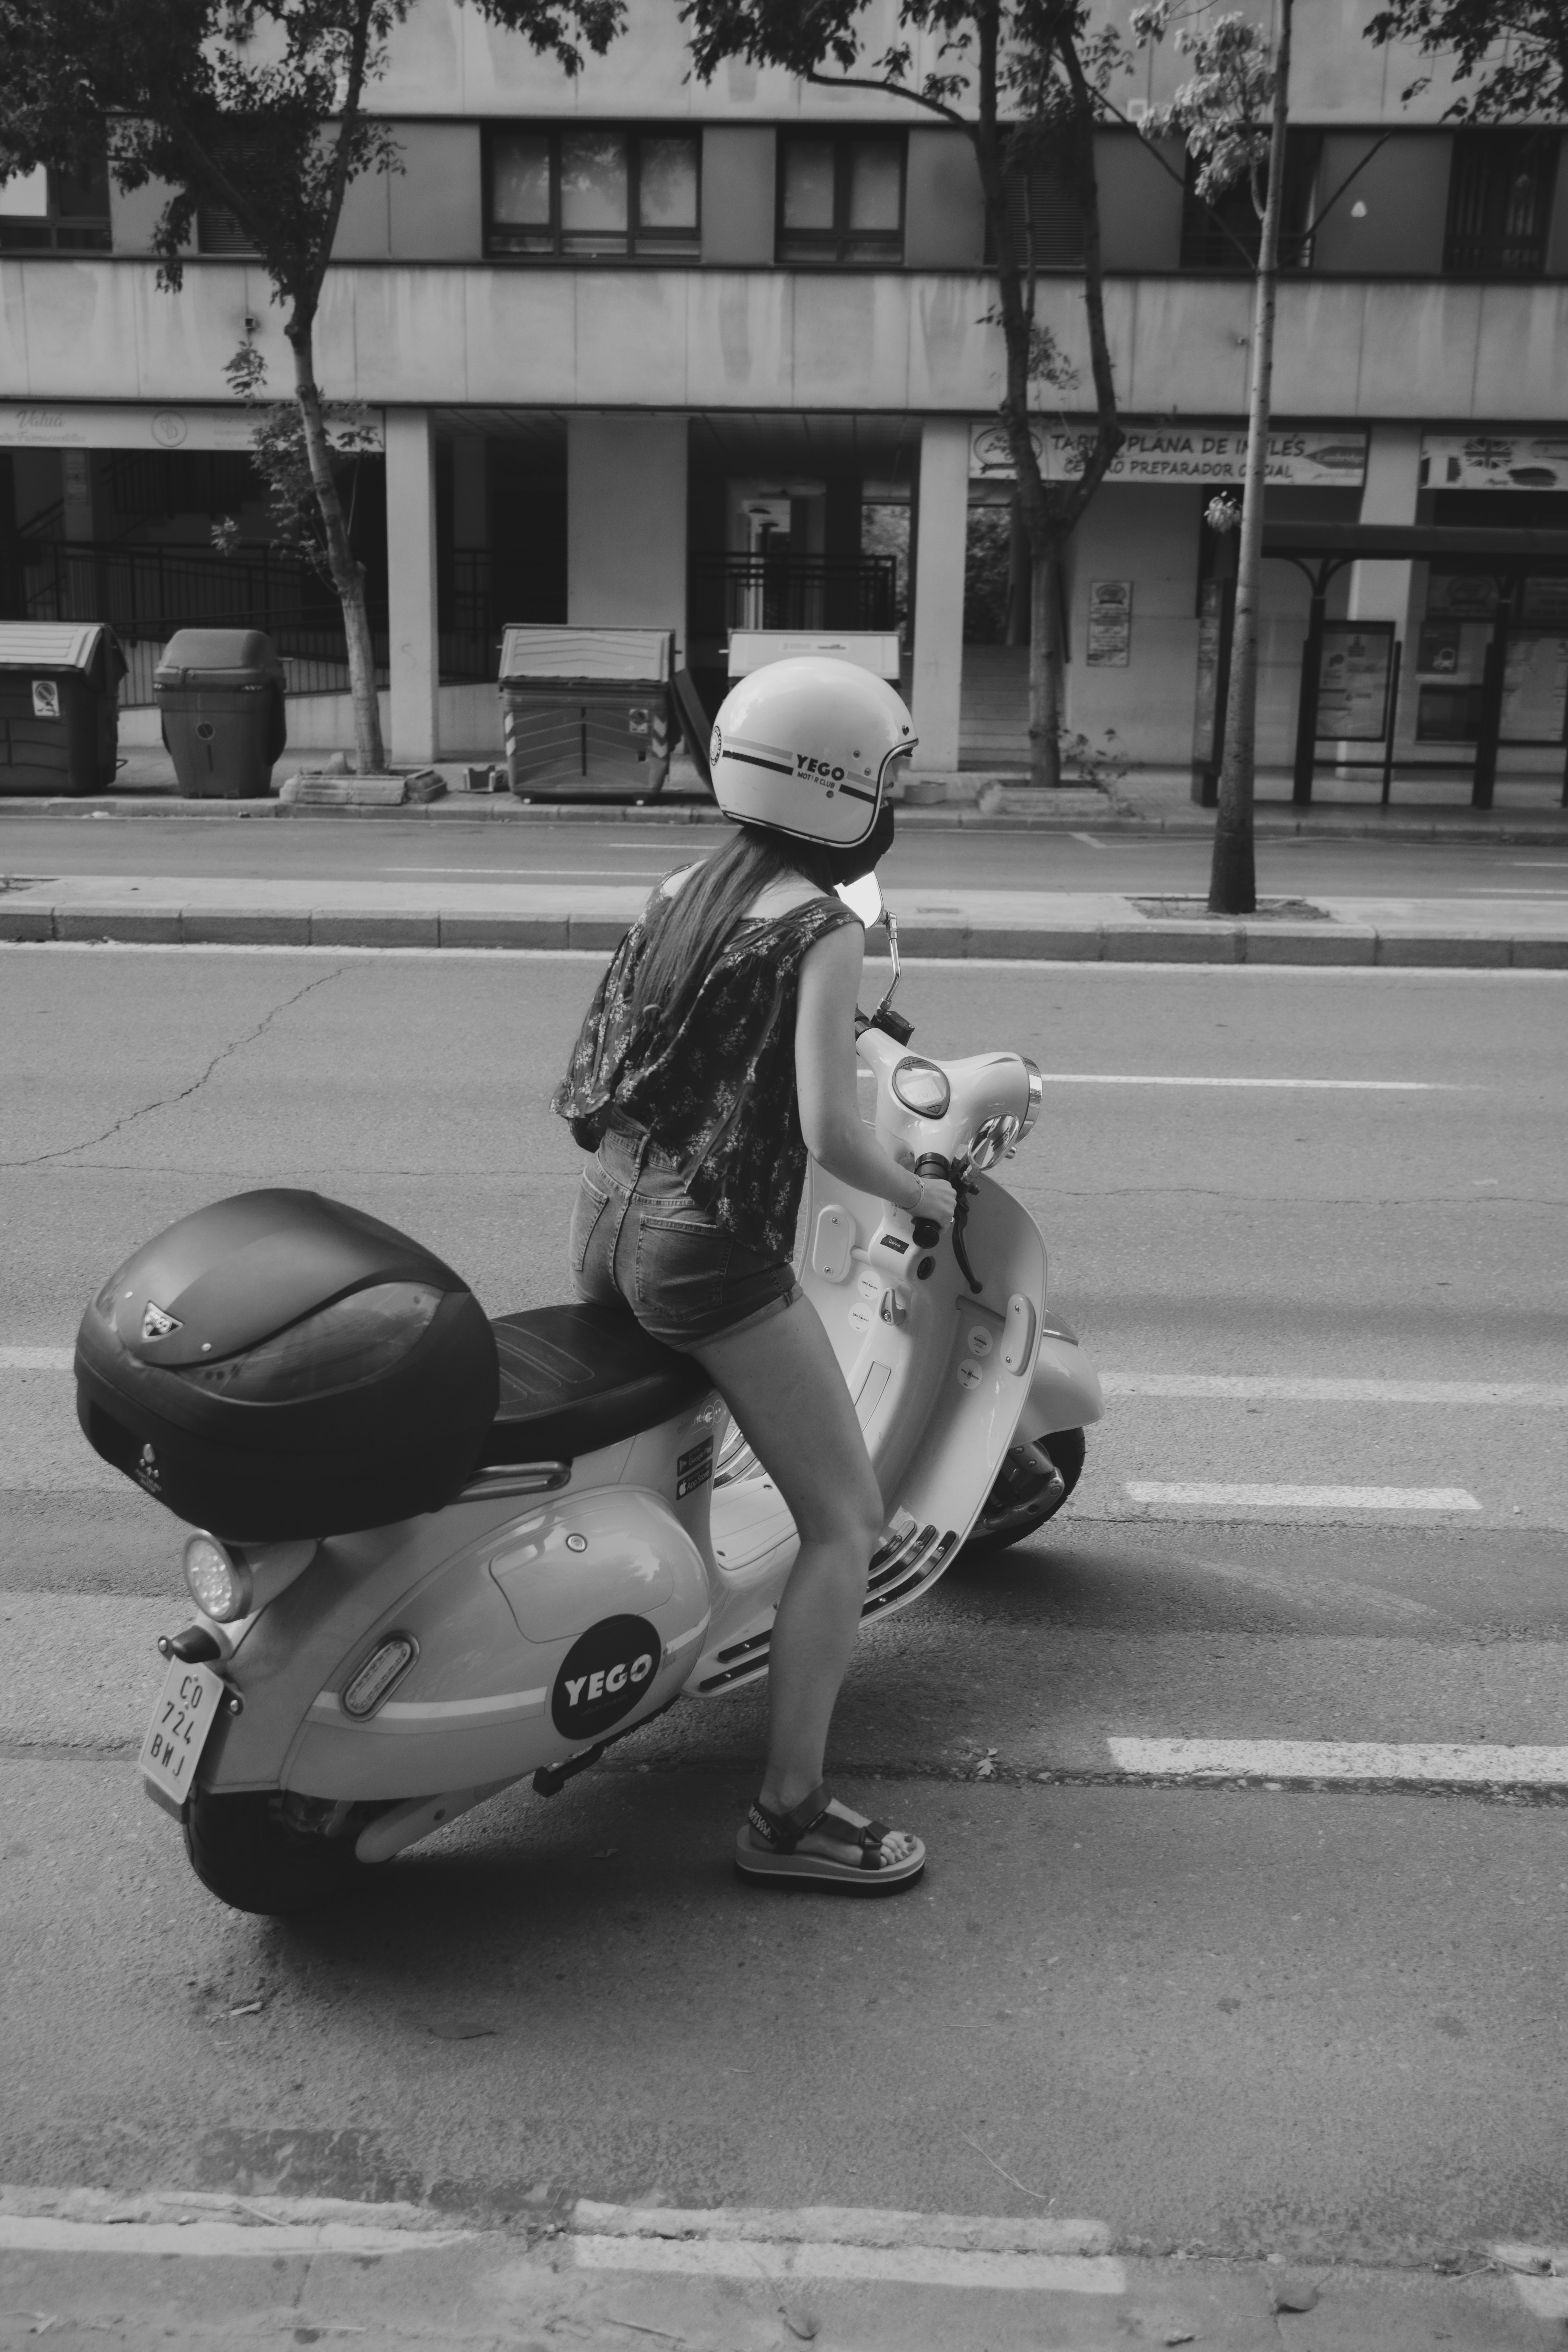 grayscale photo of woman riding motorcycle